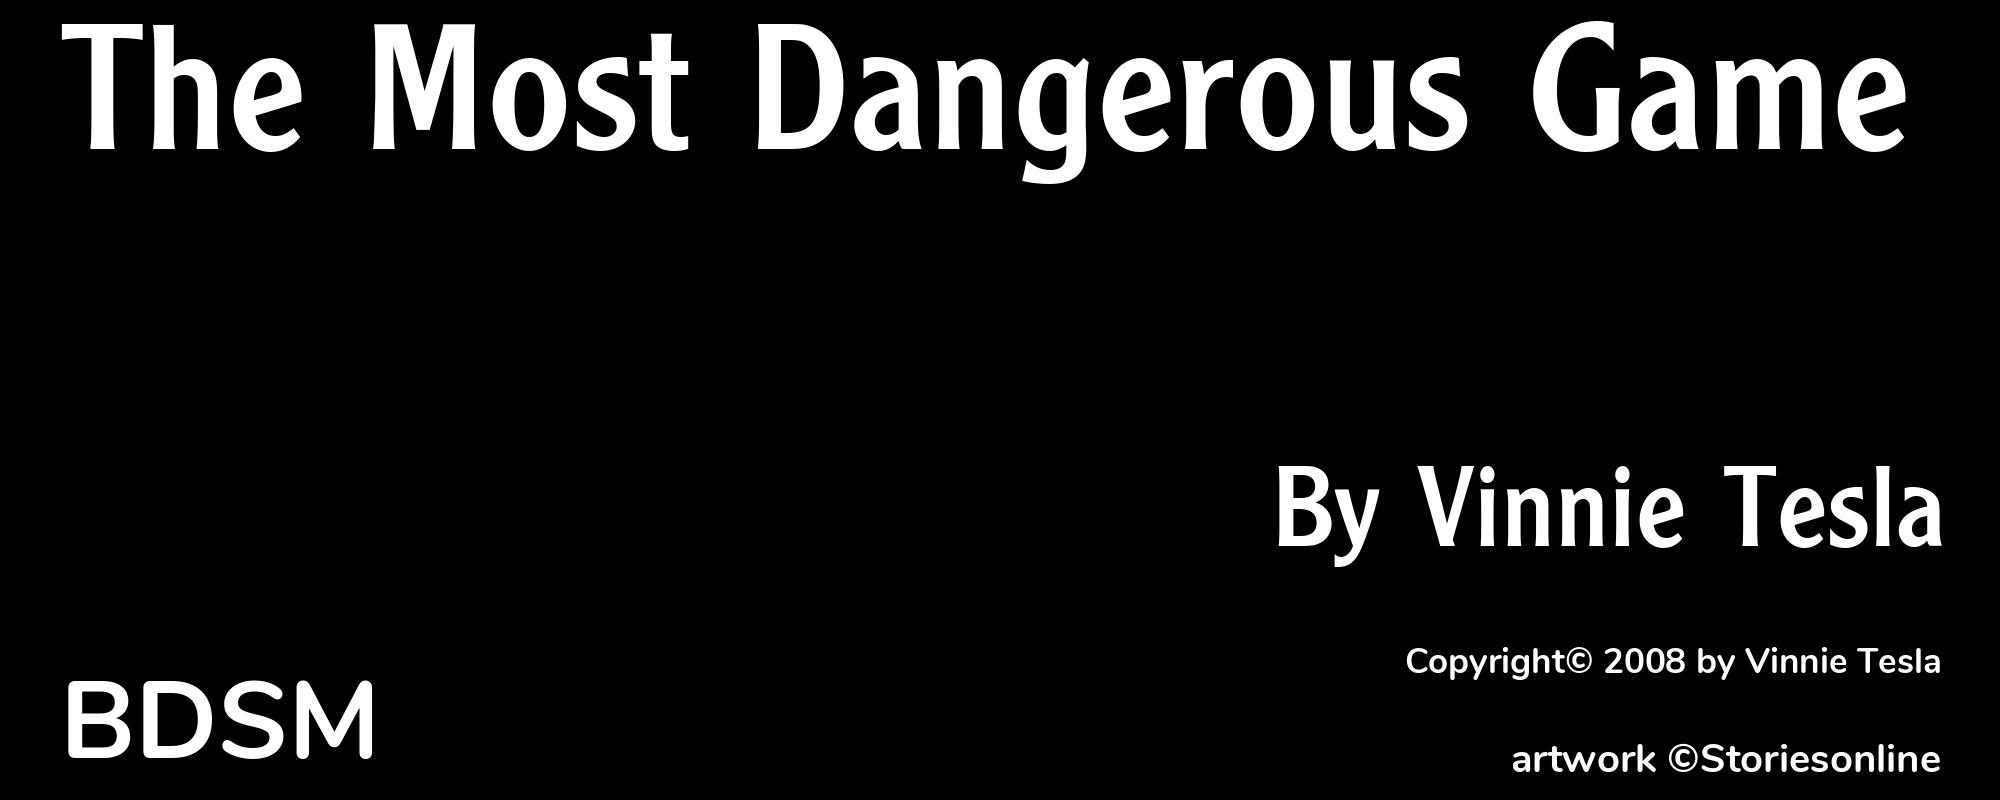 The Most Dangerous Game - Cover